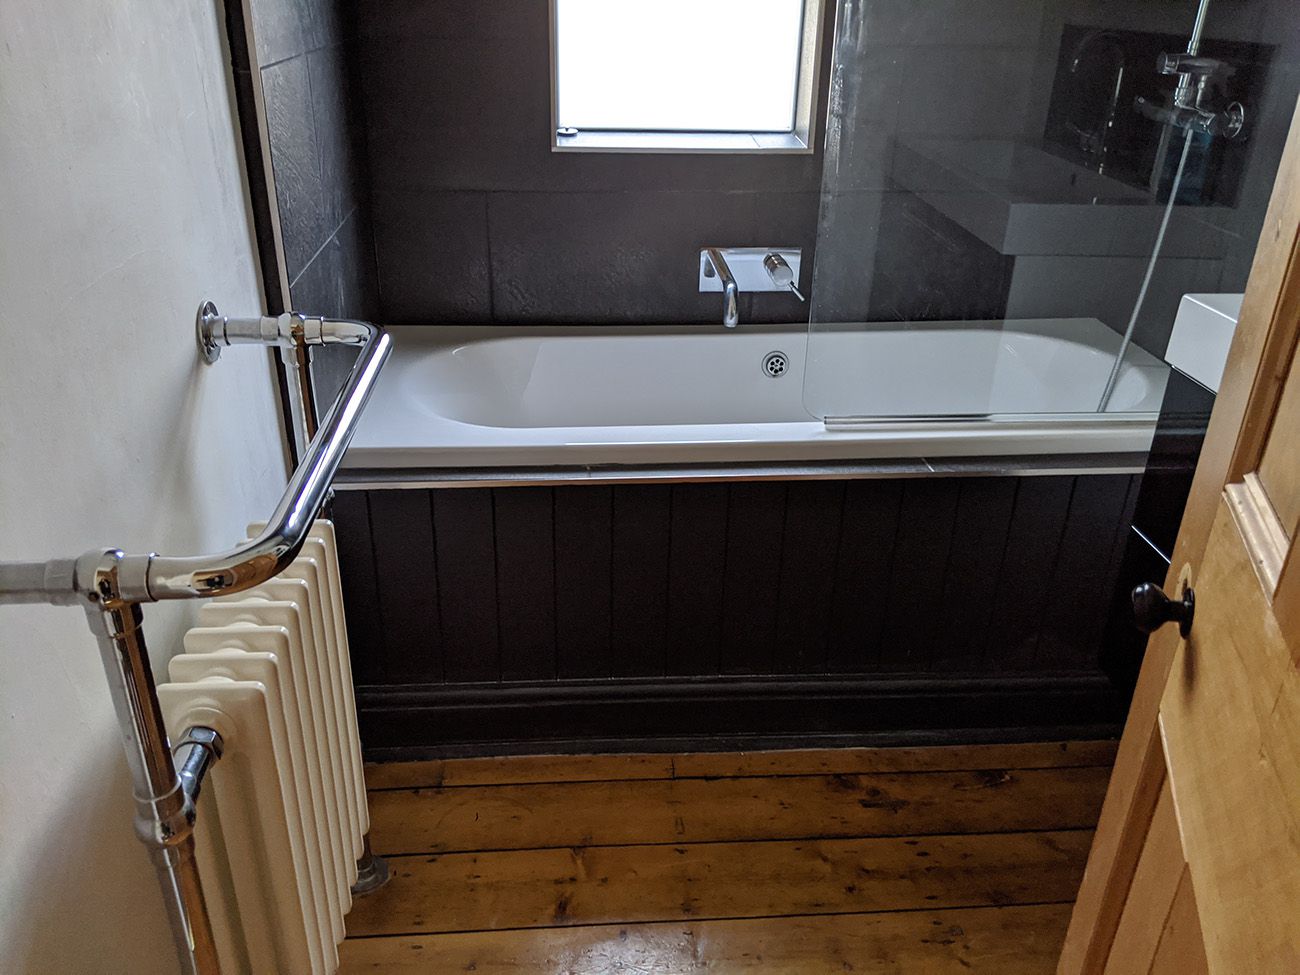 The bathroom was dark grey with chrome fittings and wooden floorboards before the redesign.